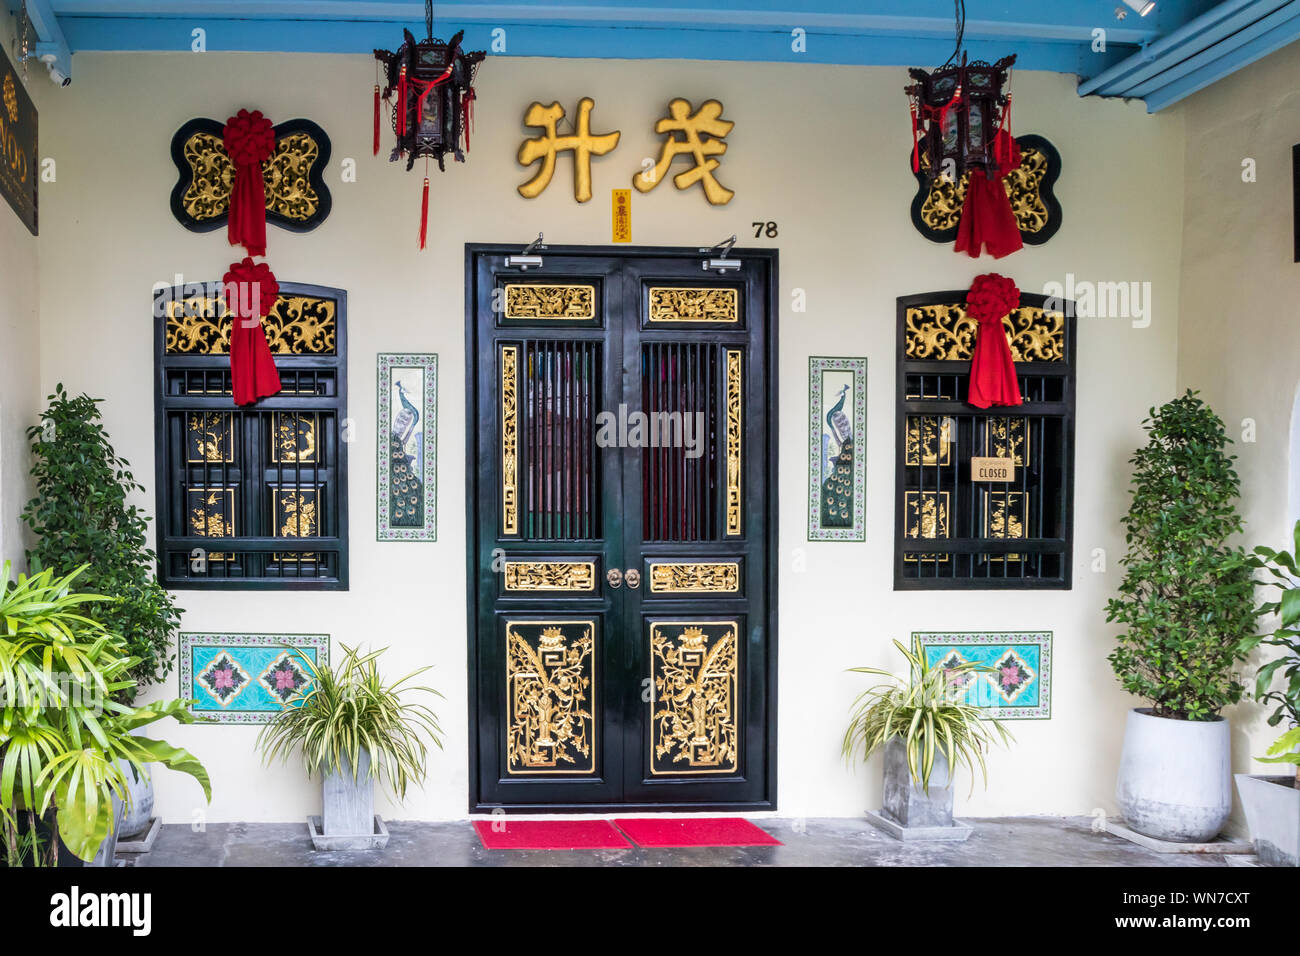 Phuket, Thailand - June 17th 2019: Renovated Sino Portuguese architecture on Thalang Road. Old Phuket town has many such buildings. Stock Photo